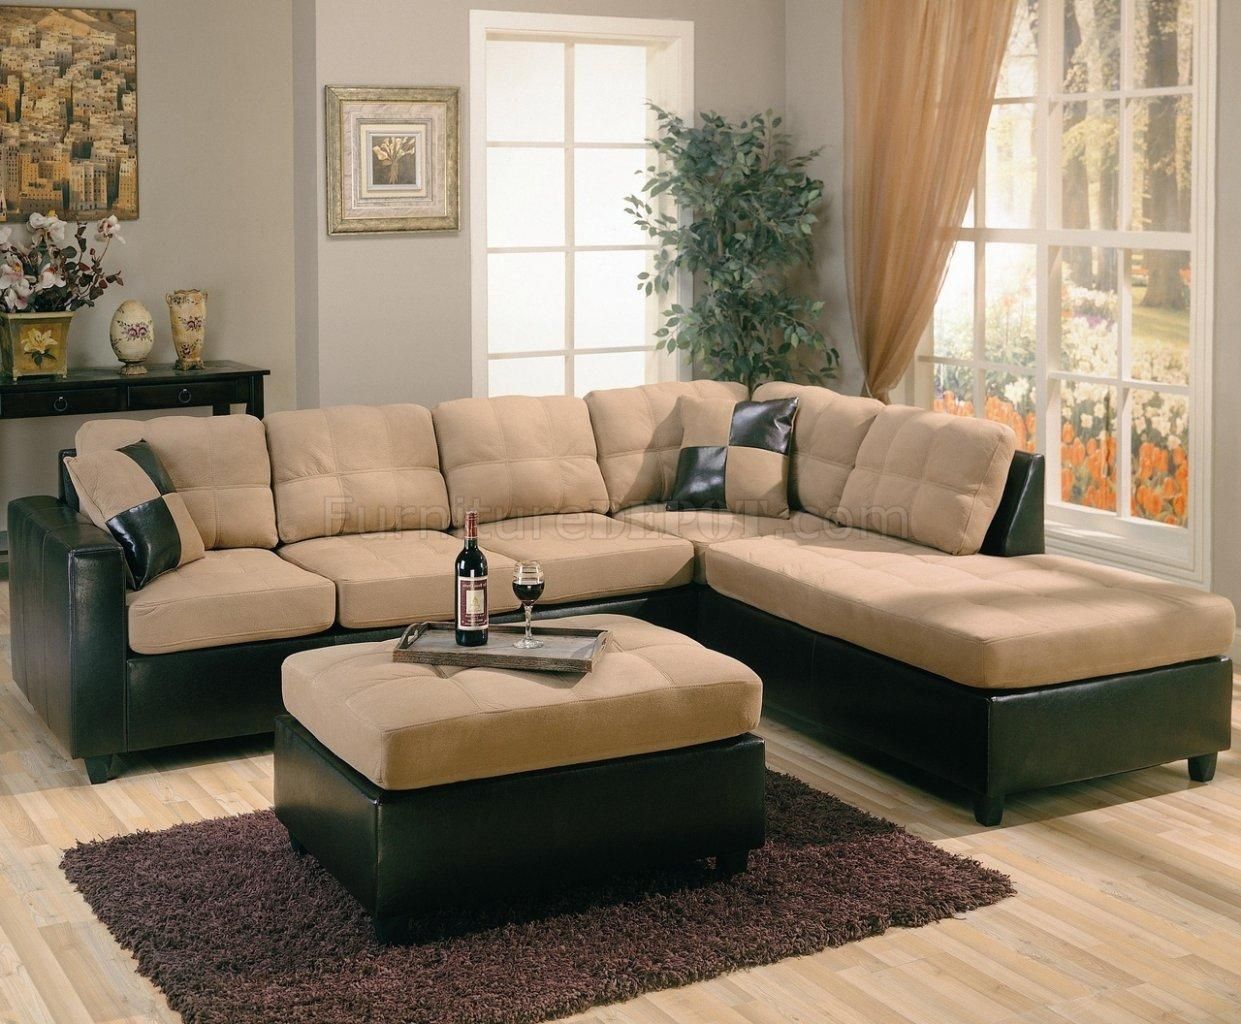 Sofa Fabric Sectionals Microfiber Sectional Sofas Microsuede Sofa With Regard To Leather And Suede Sectional Sofa (View 10 of 20)